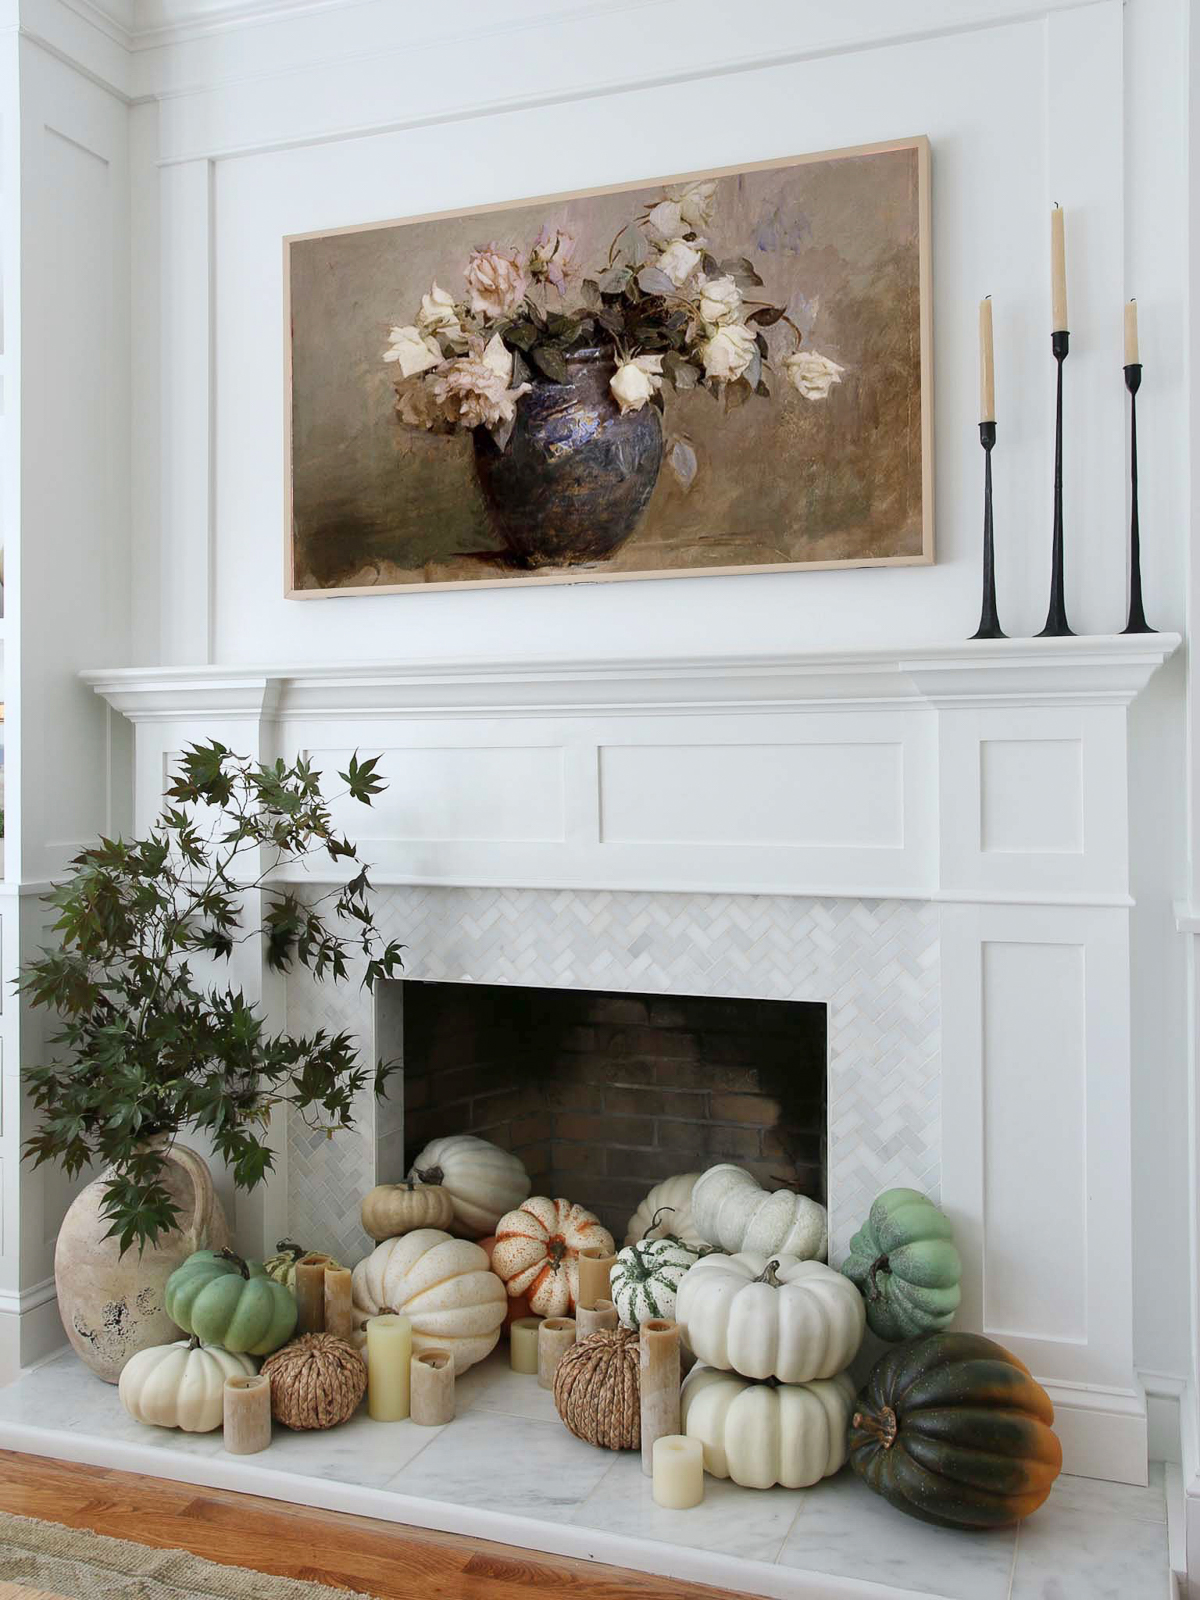 Fireplace with pumpkins at hearth and tv above